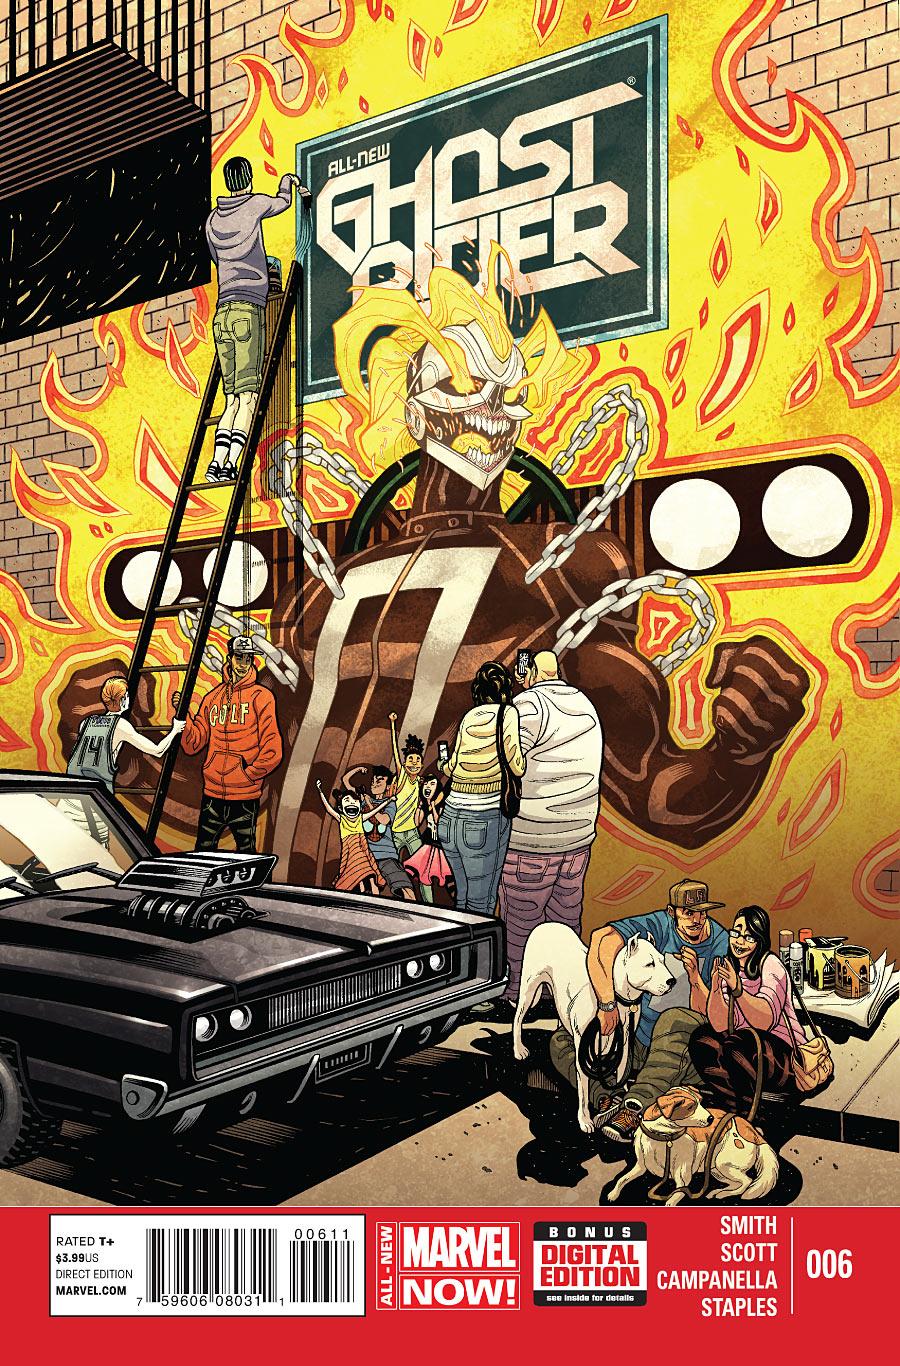 All-New Ghost Rider Vol. 1 #6